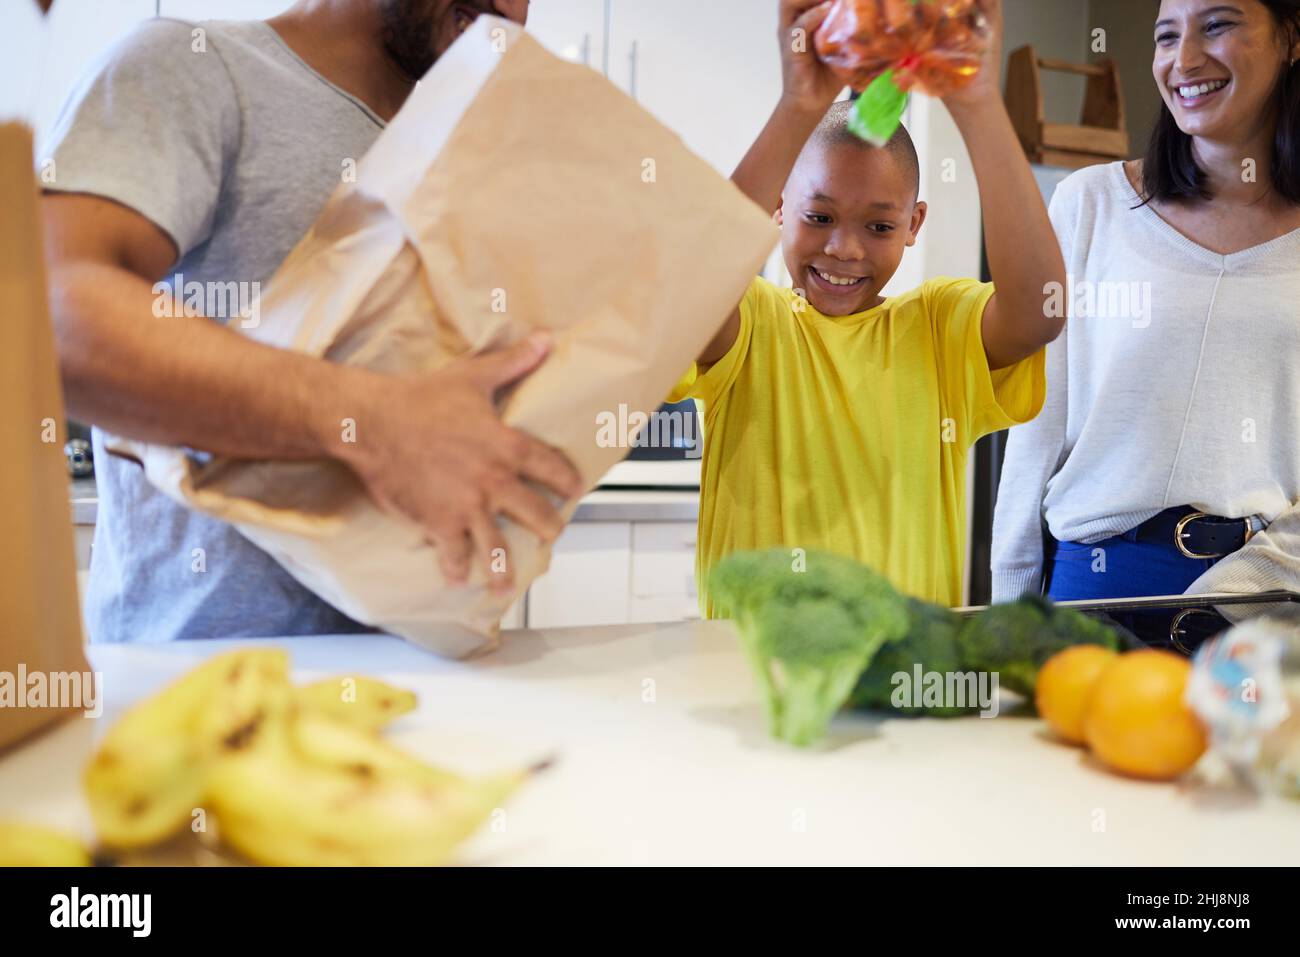 Helping the family to make supper. Shot of a family unpacking the groceries in the kitchen at home. Stock Photo